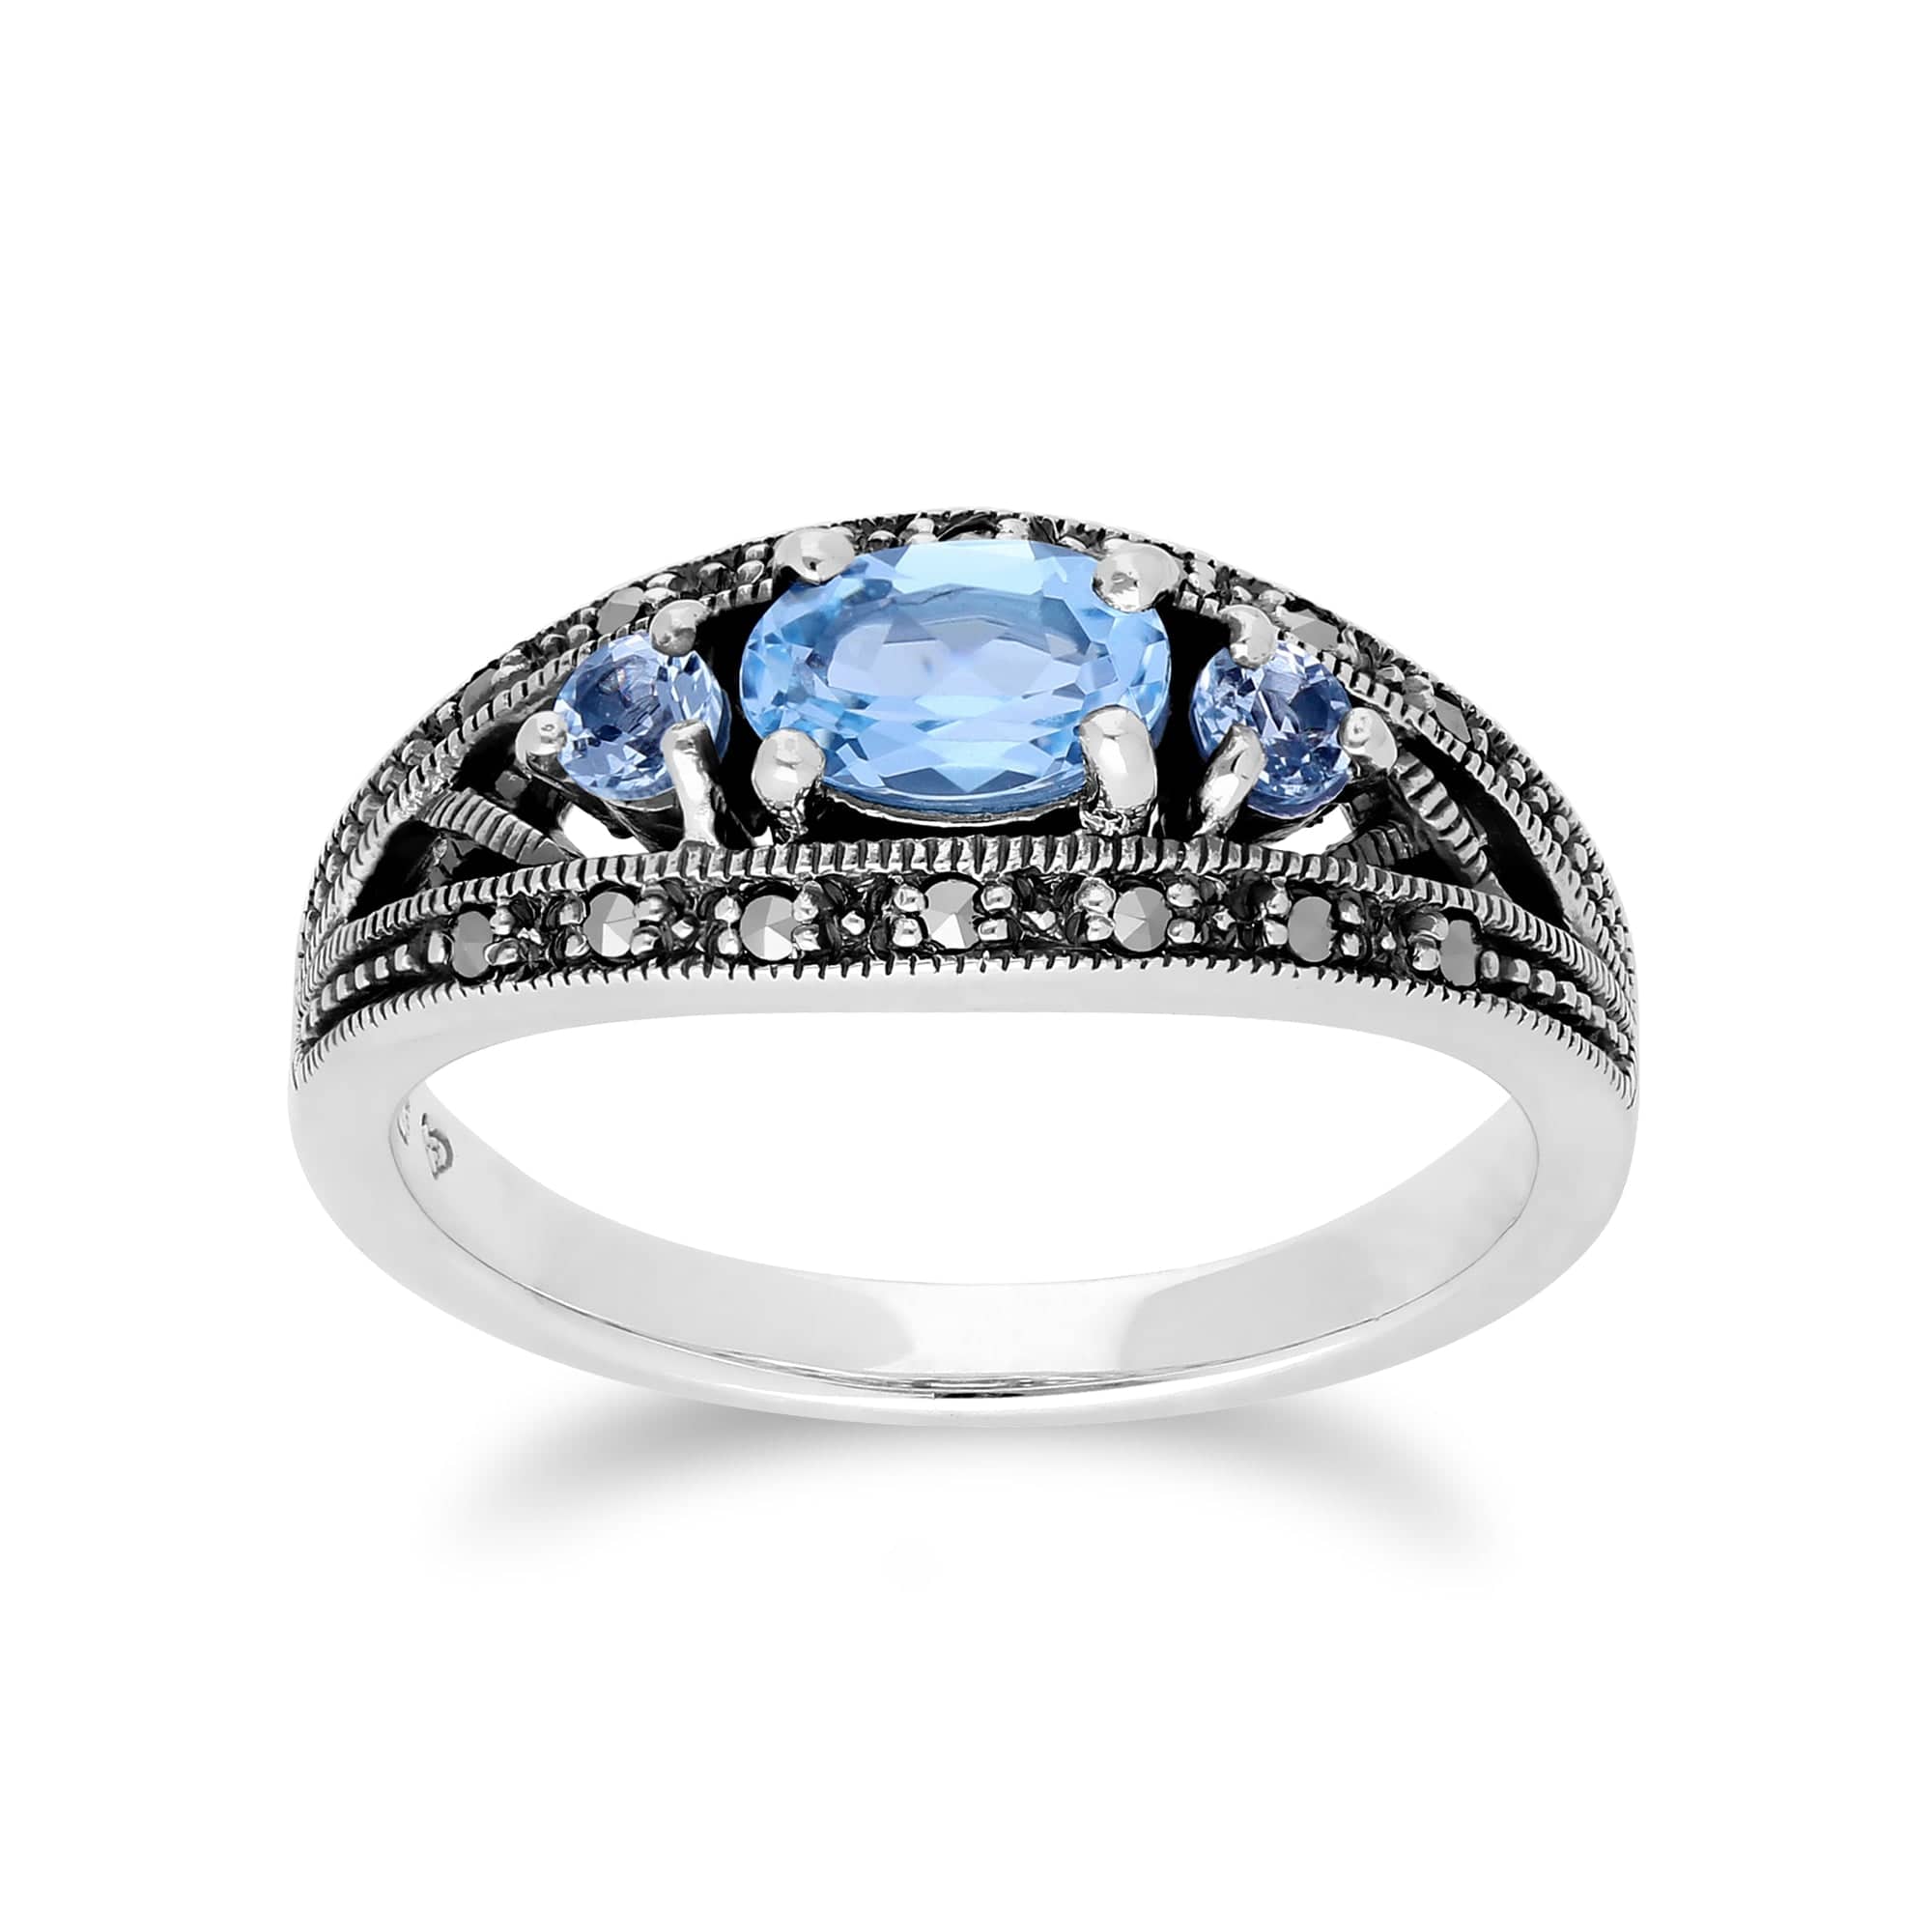 Art Deco Style Oval Blue Topaz & Marcasite Three Stone Ring in 925 Sterling Silver